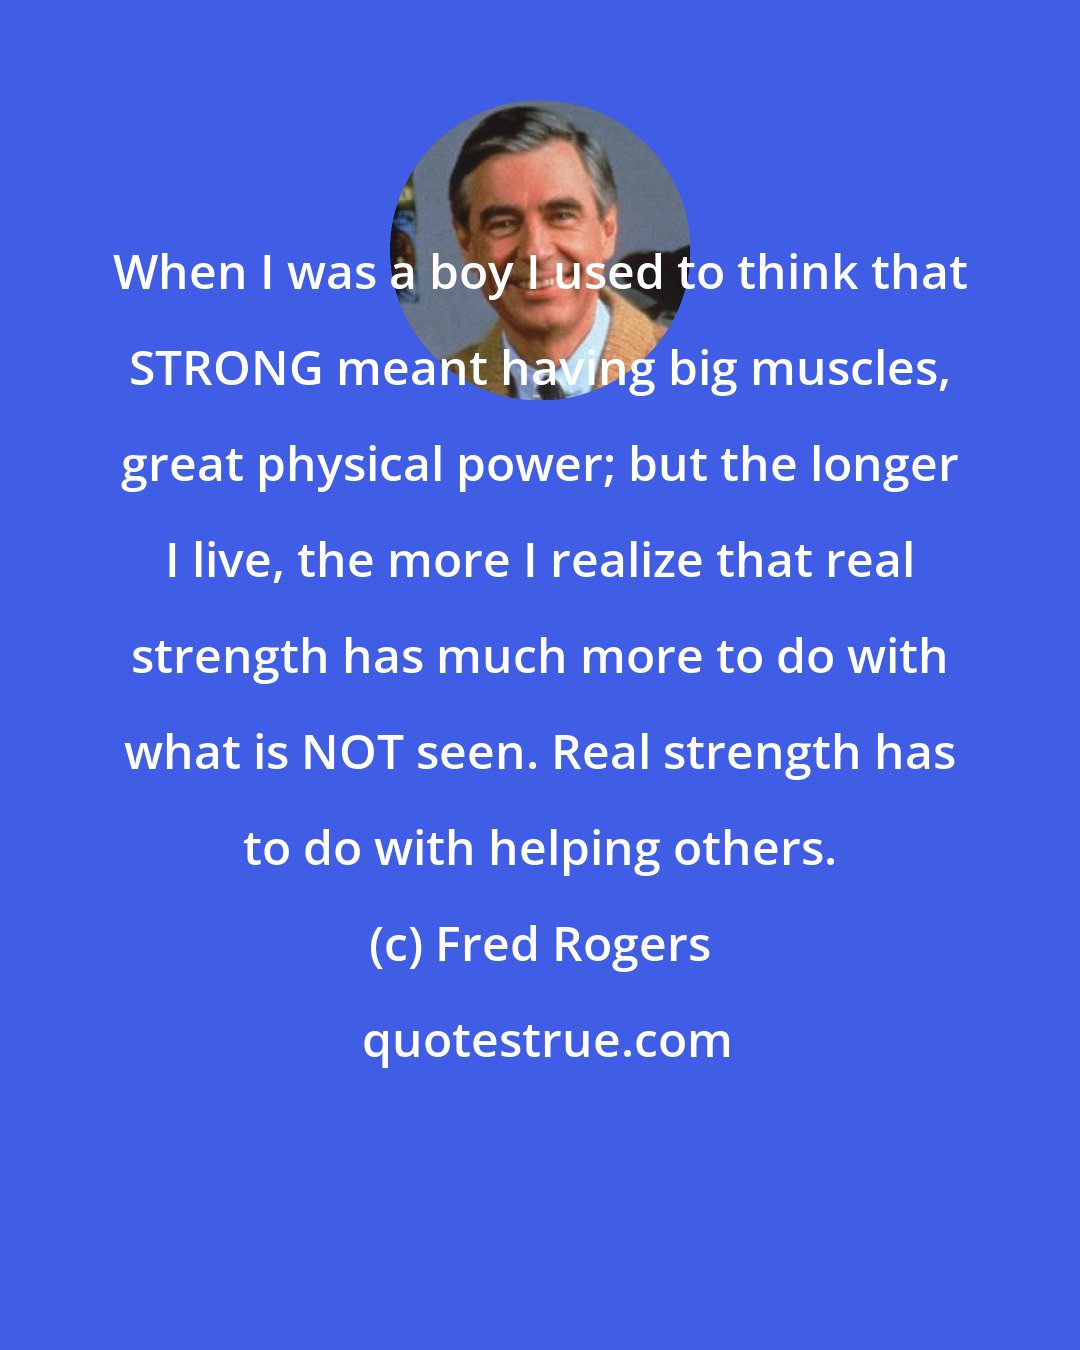 Fred Rogers: When I was a boy I used to think that STRONG meant having big muscles, great physical power; but the longer I live, the more I realize that real strength has much more to do with what is NOT seen. Real strength has to do with helping others.